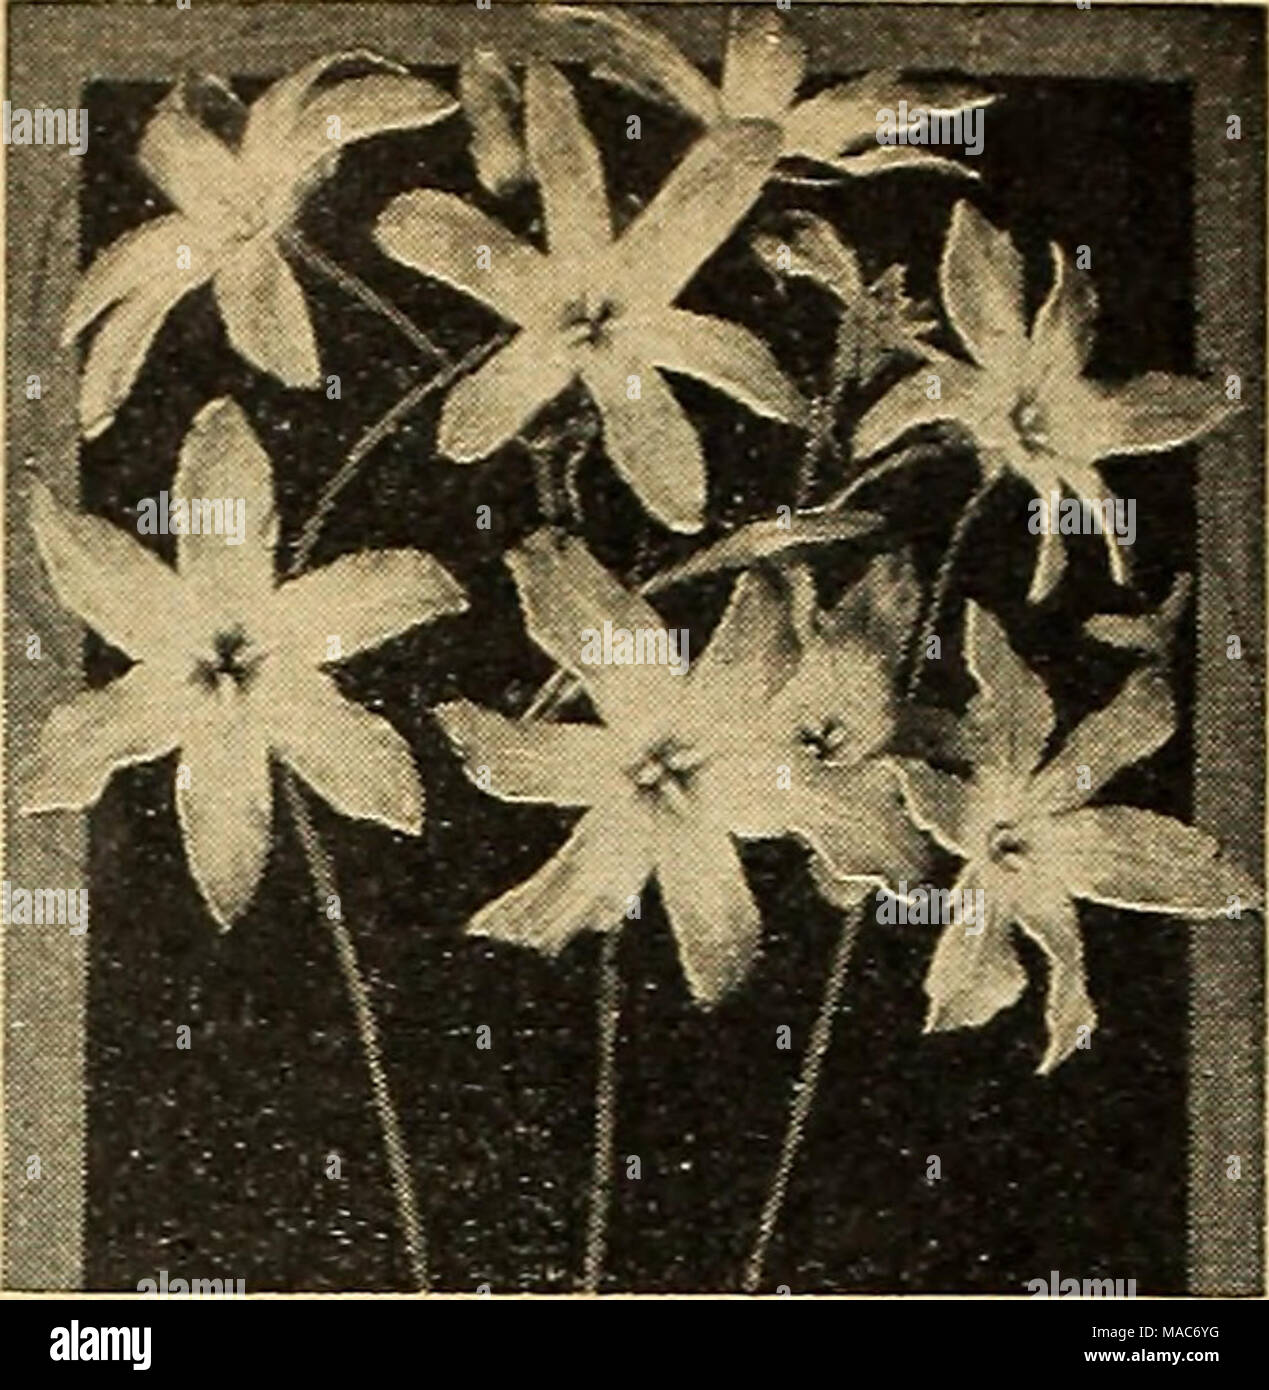 . Dreer's planting guide autumn 1944 . Leucocoryne ixioides odorata Leucocoryne Glory of the Sun Ixioides odorata. An e.xcellent bulb- ous plant for growing indoors. Requires the same general growing conditions as Freesias such as a temperature of 55° to 65° F. Pro- duces its lovely, large, star-shaped blooms in February and March, carrying 4 to 6 slightly fragrant, light blue flowers with white mark- ings in the center on strong, wiry, 12 inch stems. The blooms last for 3 to 4 weeks. 45-540 Top Size Bulbs: 3 for 40c; 12 for $1.35; 25 for $2.25. 40-542 Jumbo Bulbs: 3 for SOc; 12 for $1.85; 25  Stock Photo